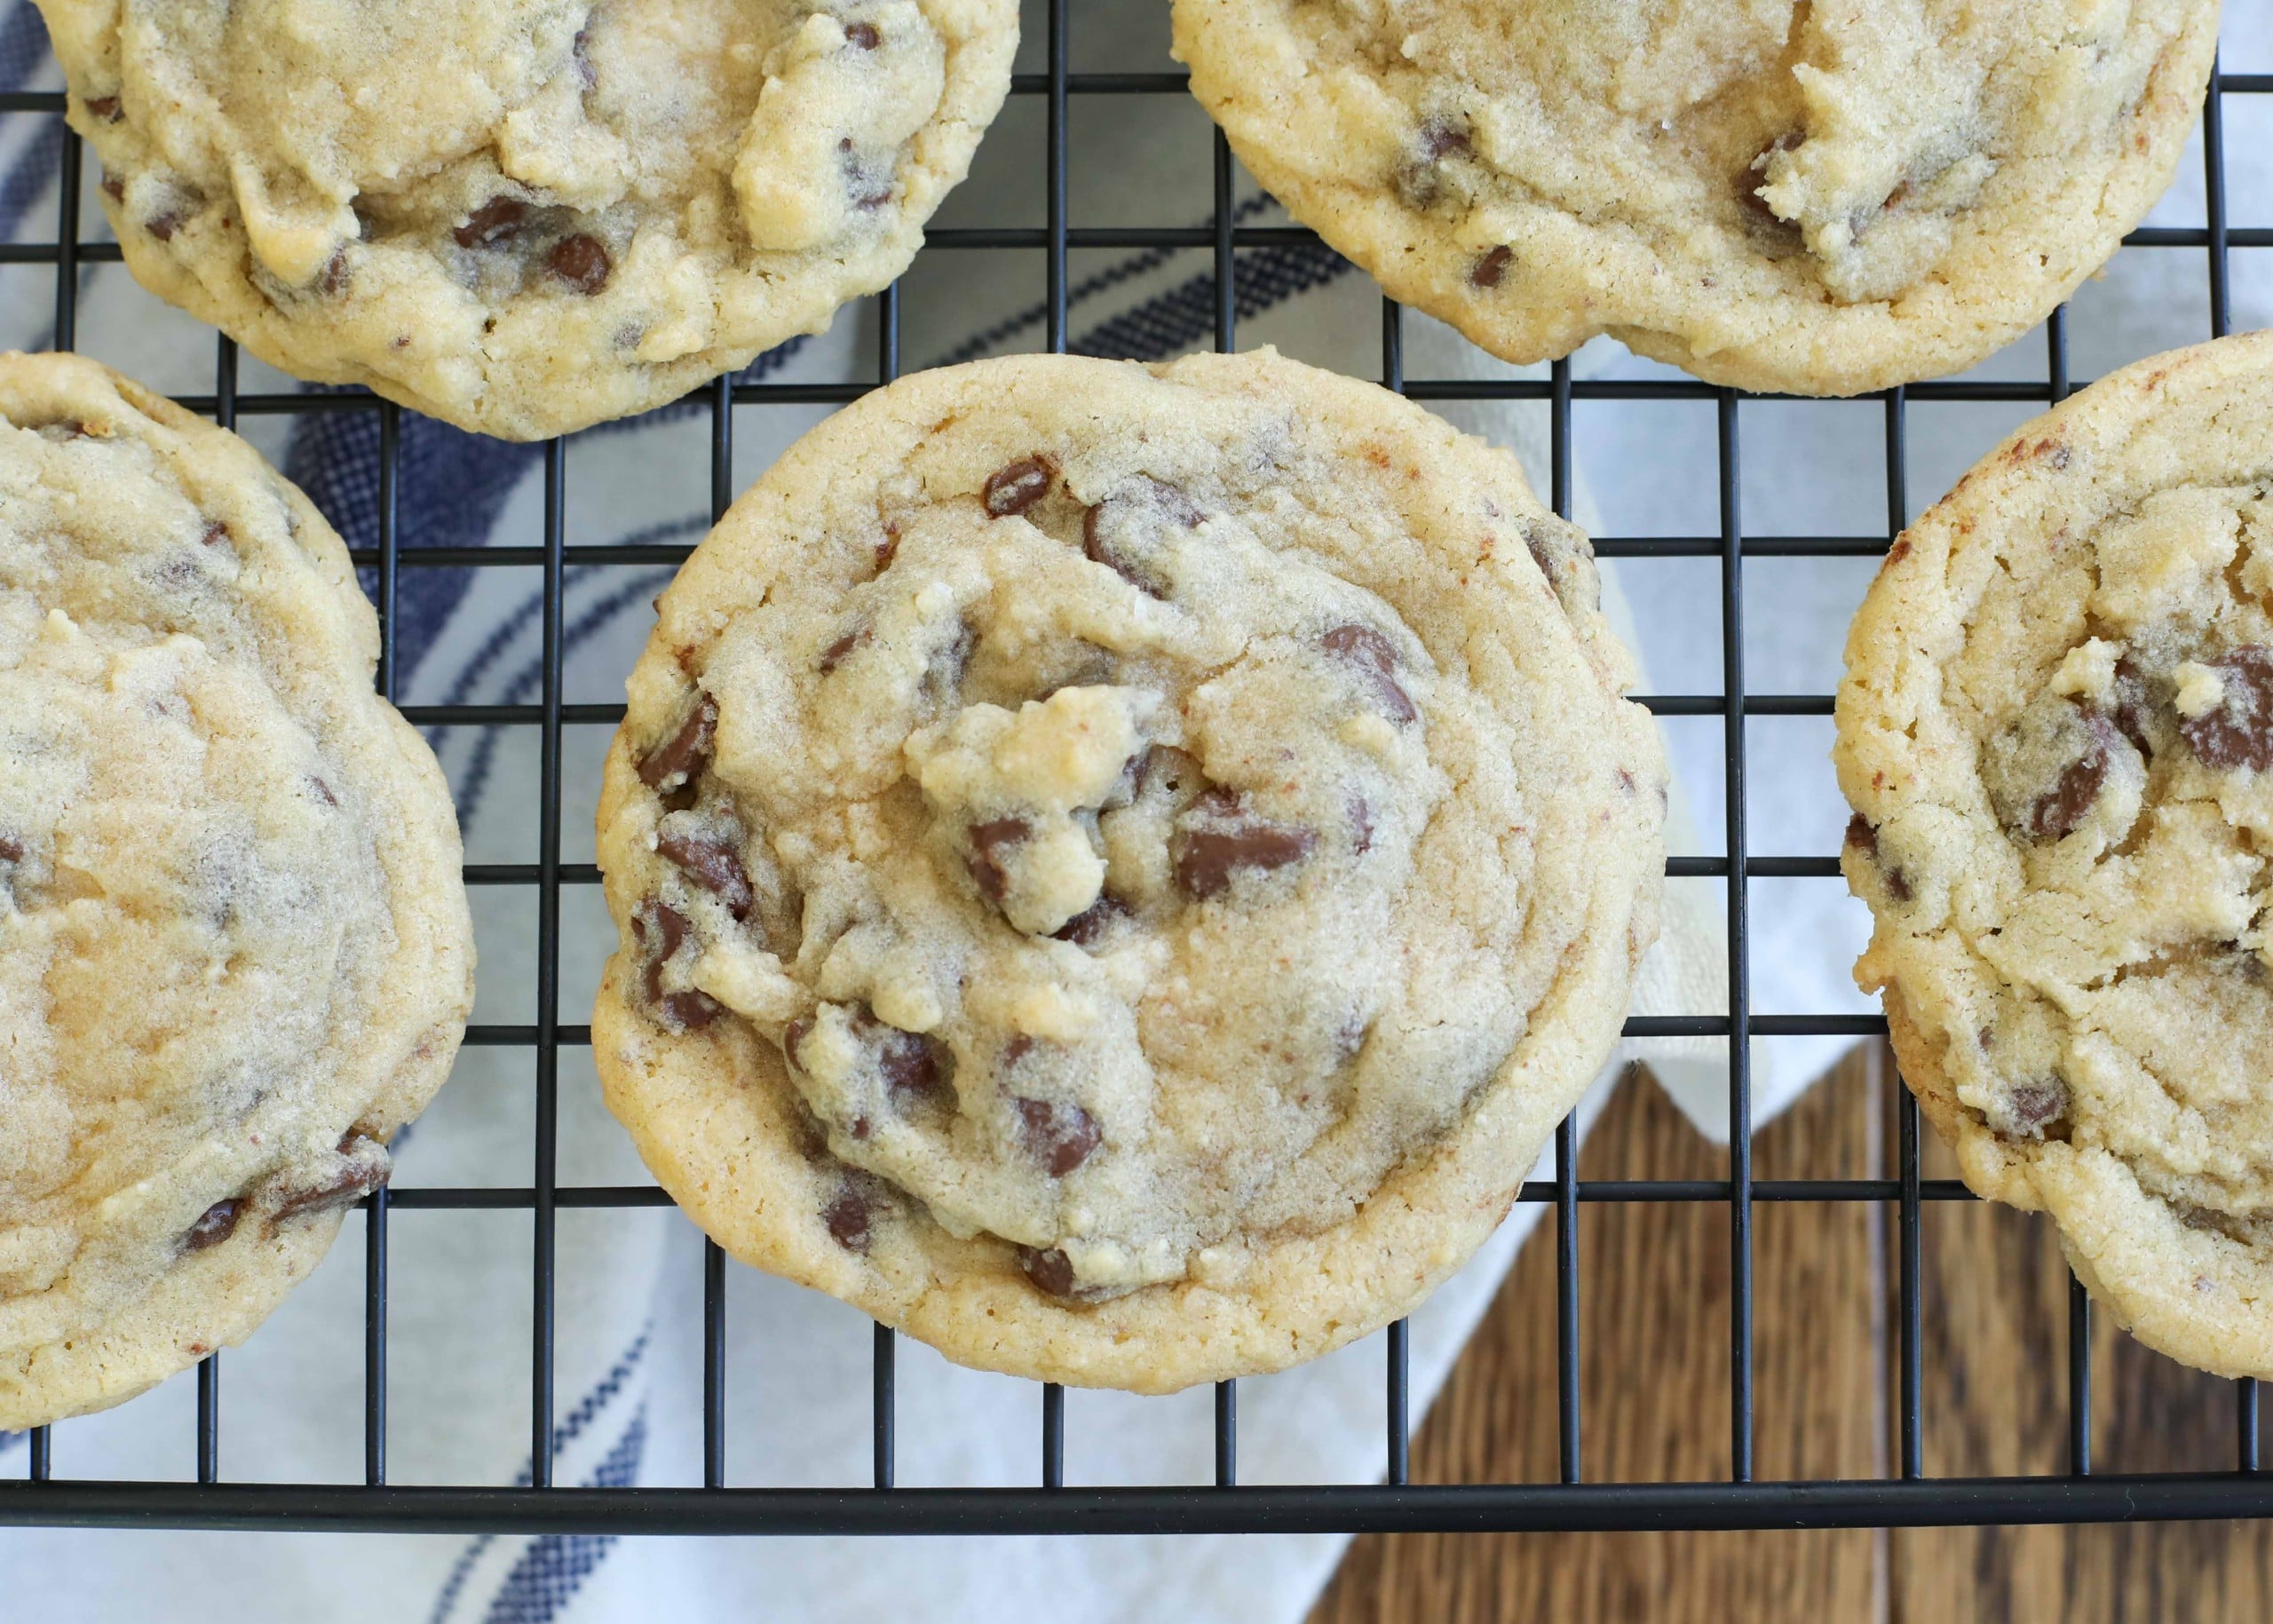 https://chocolatewithgrace.com/wp-content/uploads/2022/06/Soft-and-Chewy-Chocolate-Chip-Cookies-5-1-of-1-scaled.jpg